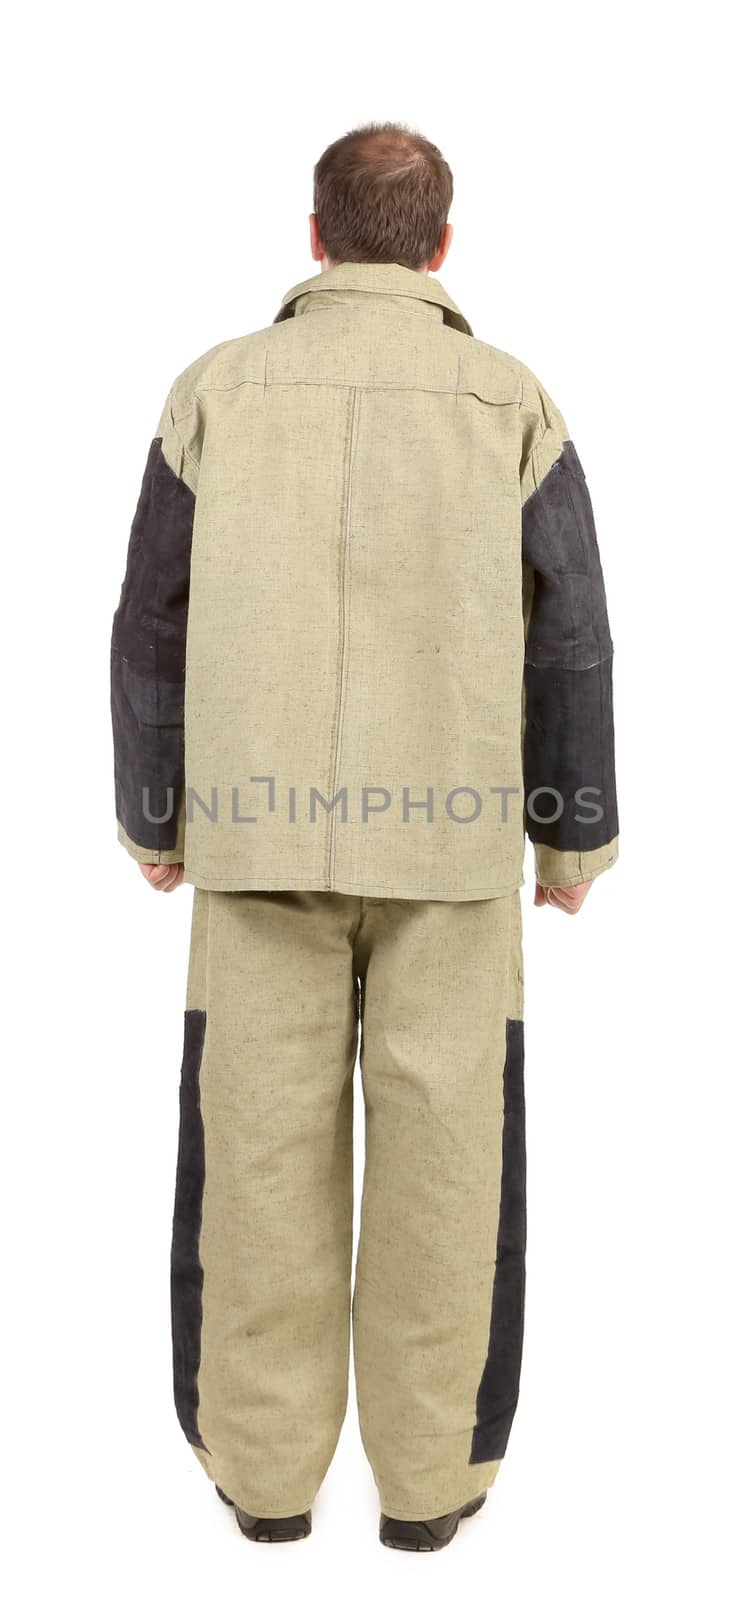 Welder in workwear suit. Back view. Isolated on a white background.